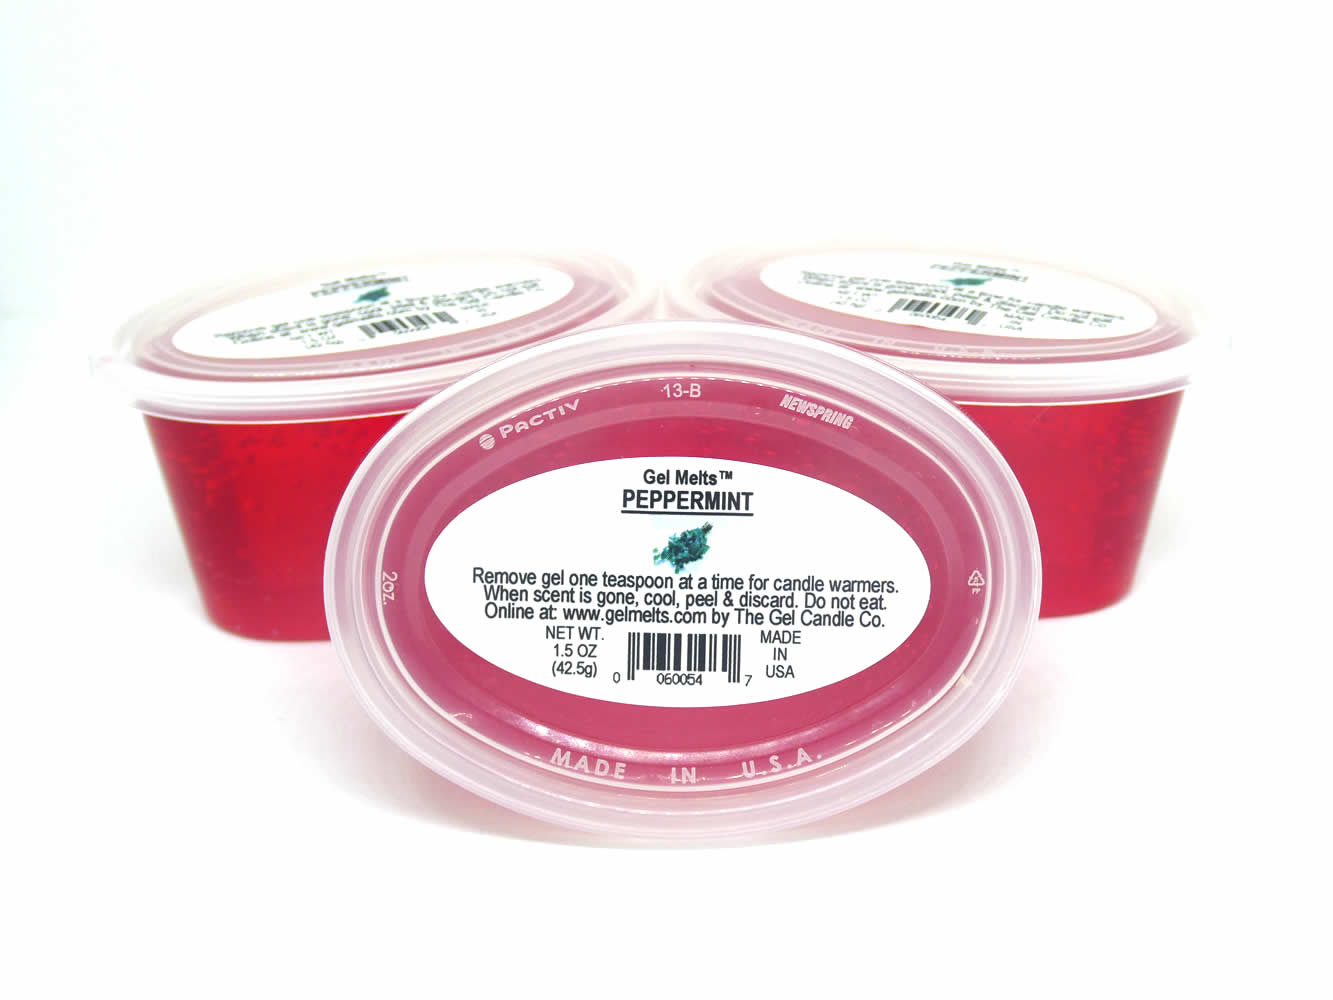 Peppermint scented Gel Melts™ Gel Wax for warmers - 3 pack - Click Image to Close